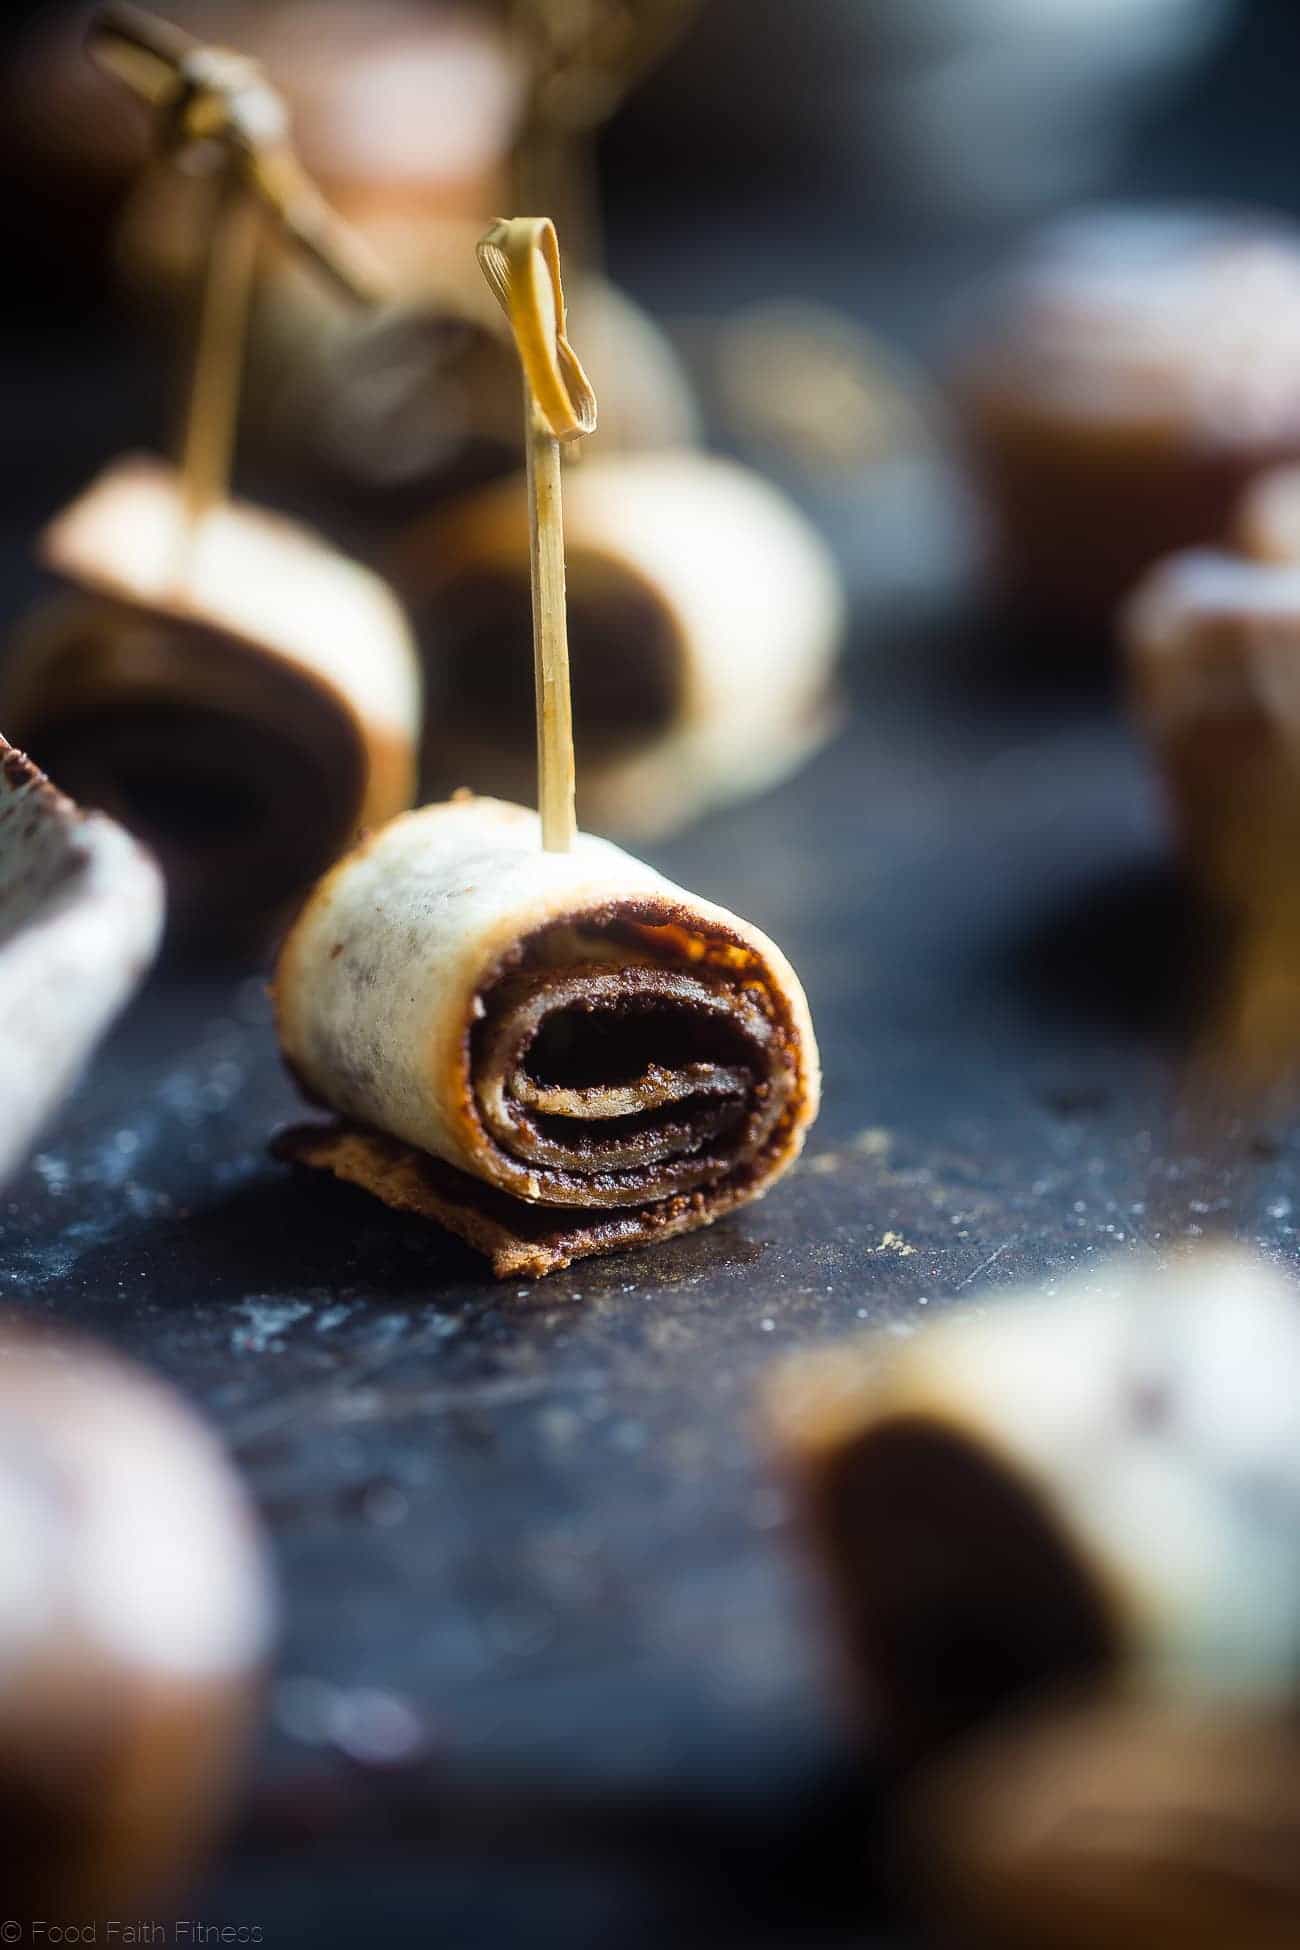 Vegan Cinnamon Roll Pinwheel Bites - This quick and easy bites tastes like a warm, ooey-gooey cinnamon roll, but without all the work! They're dairy and gluten free and ready in under 30 mins! | Foodfaithfitness.com | @FoodFaithFit